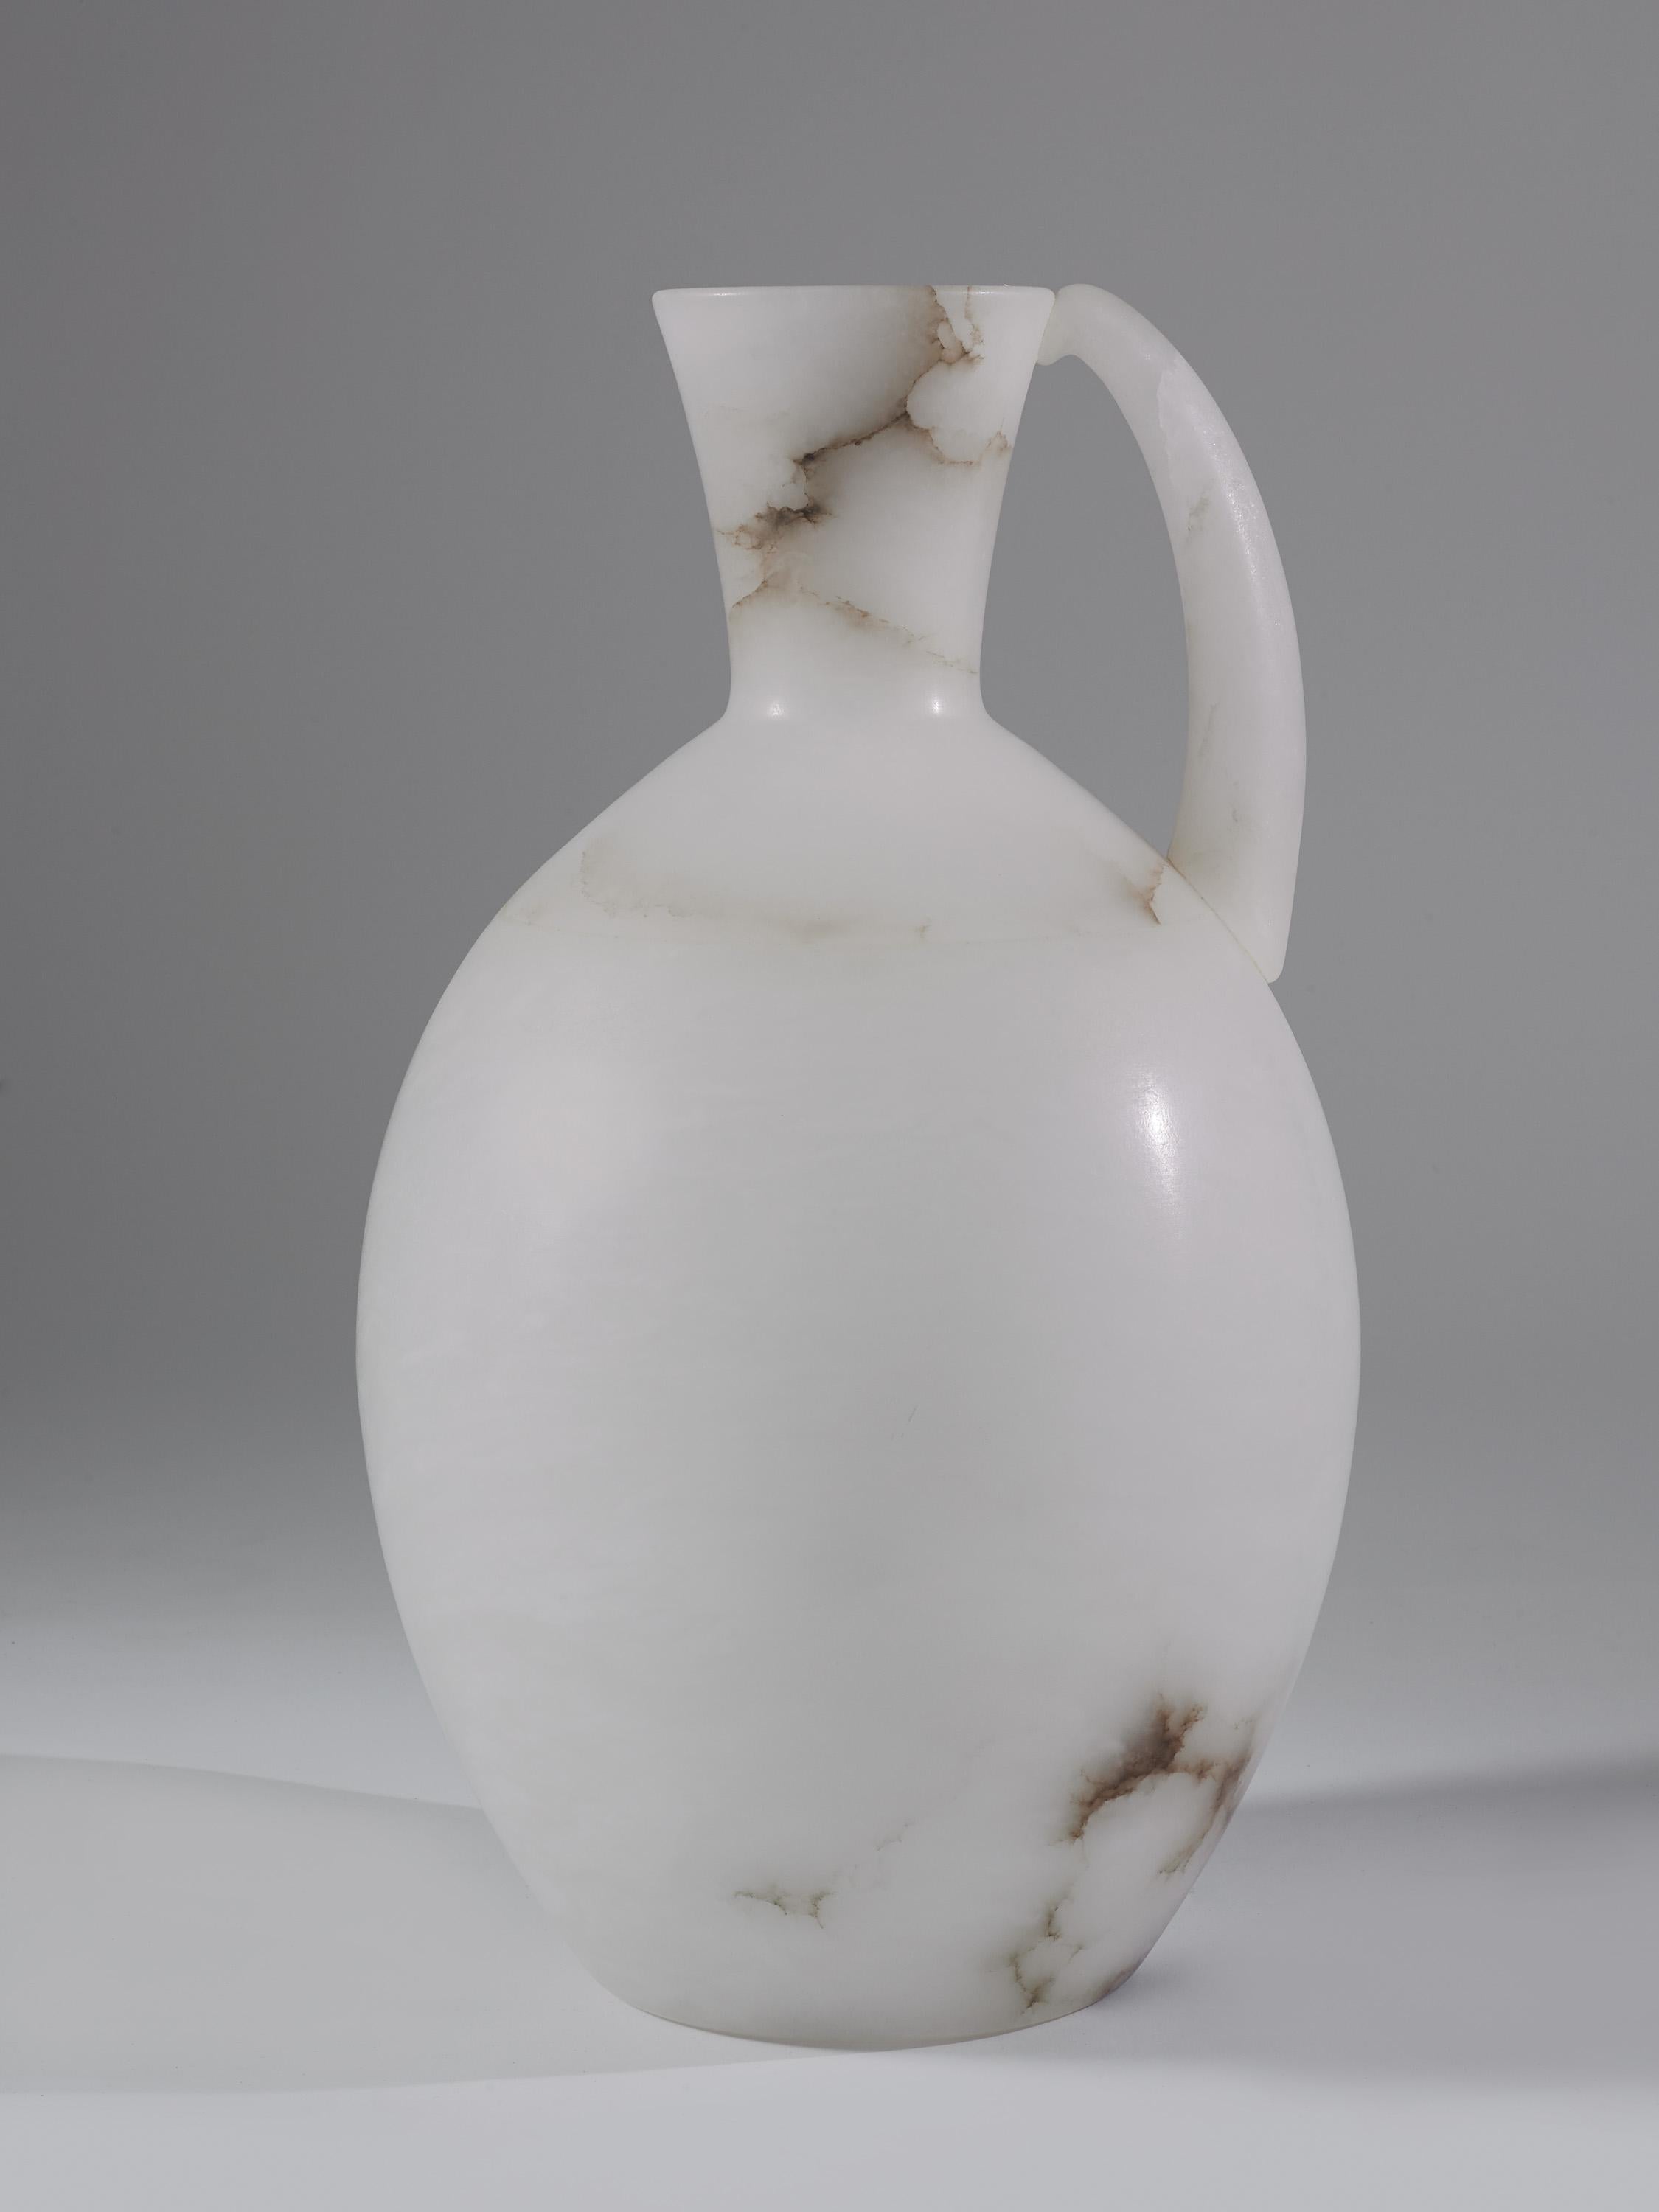 Very impressive large jug sculpted from the purest alabaster found in Italy sculpted by Una Manicci. White with beautiful natural grey vein, inspired by the egyptian clay vessels used to store and transport water. A unique piece made exclusively for